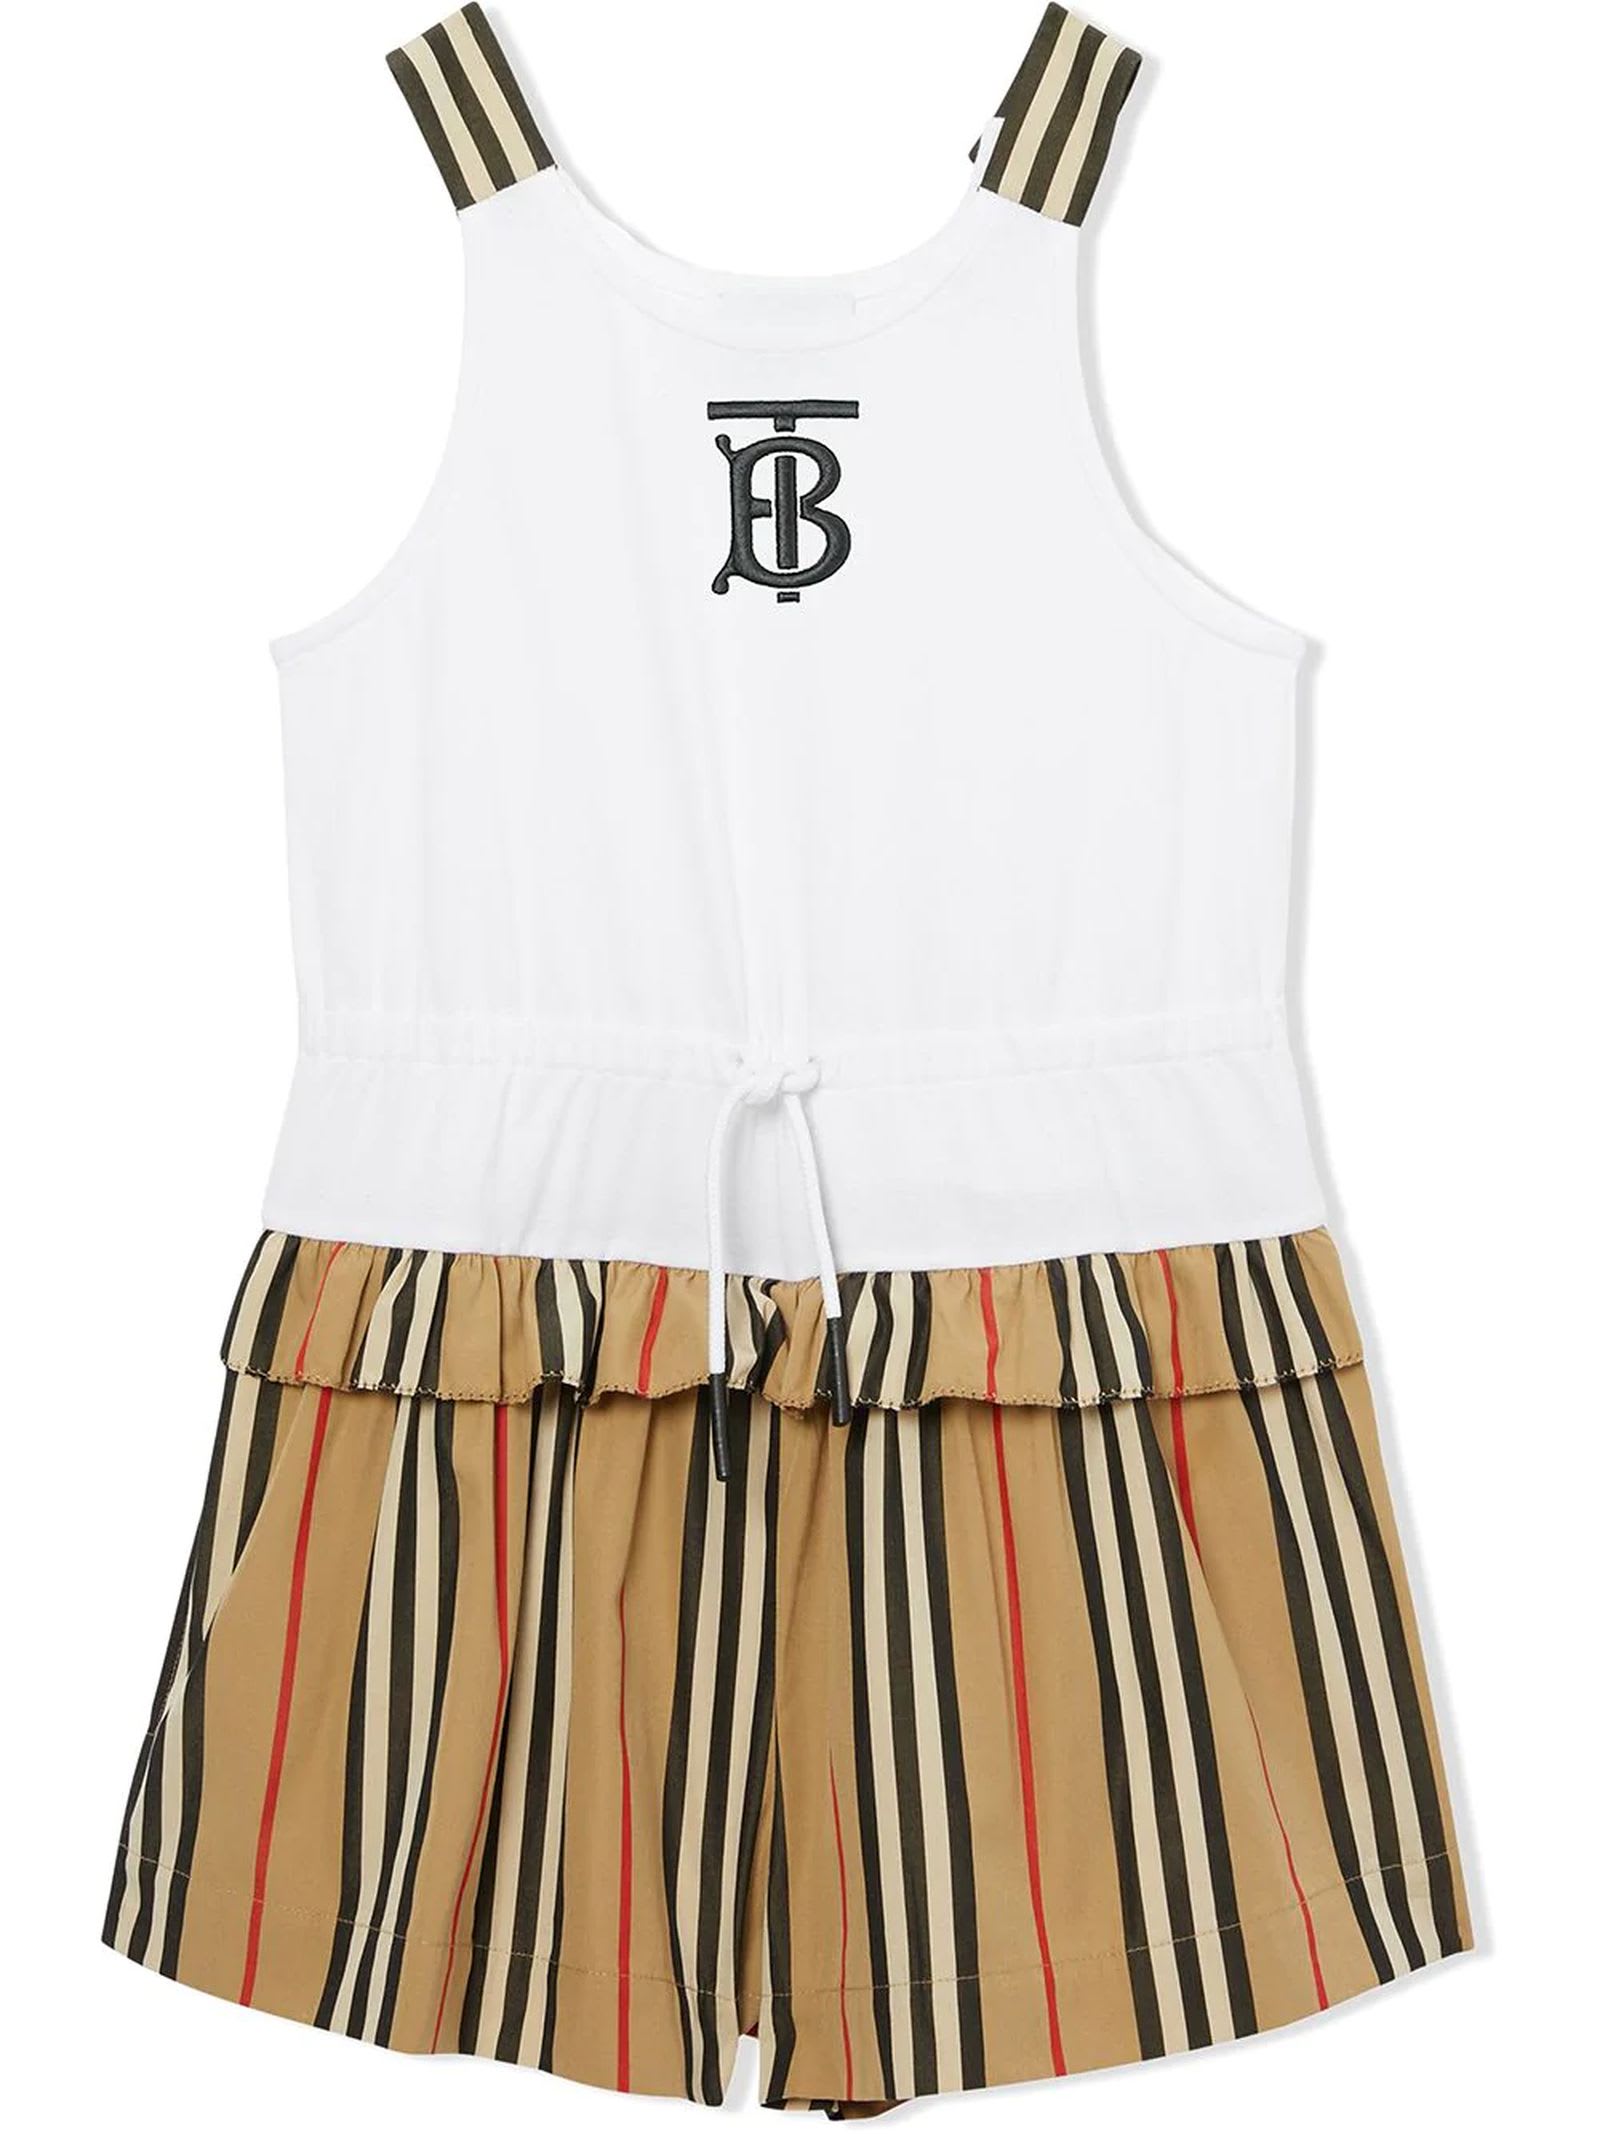 Burberry Kids' White And Beige Cotton Playsuit